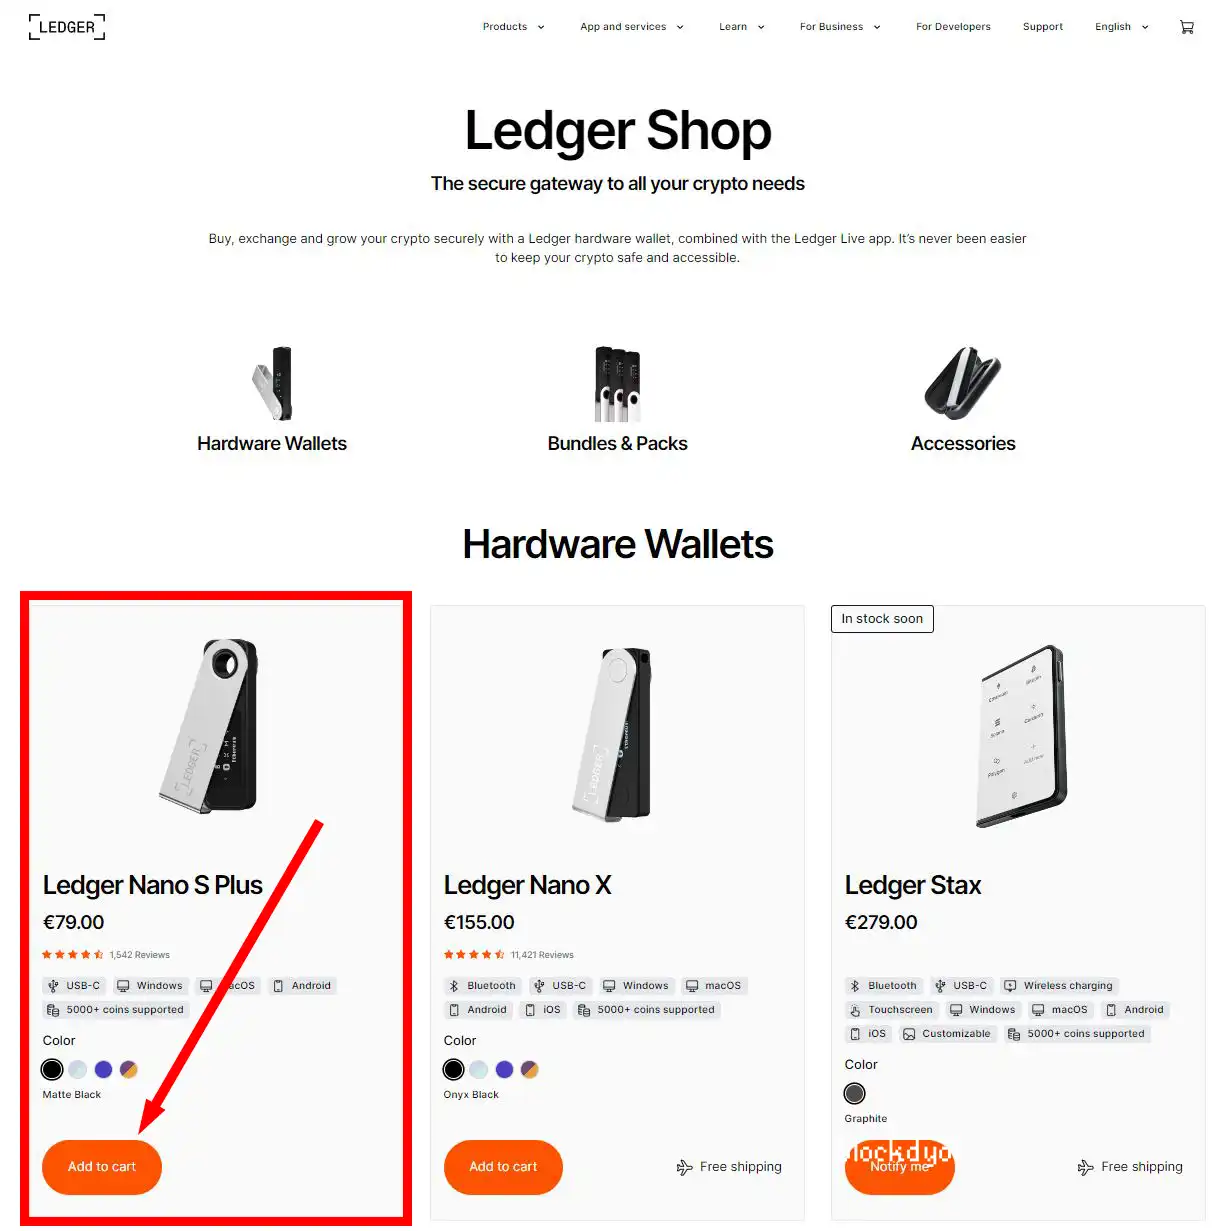 How To Buy The Ledger Nano S Plus Step 1